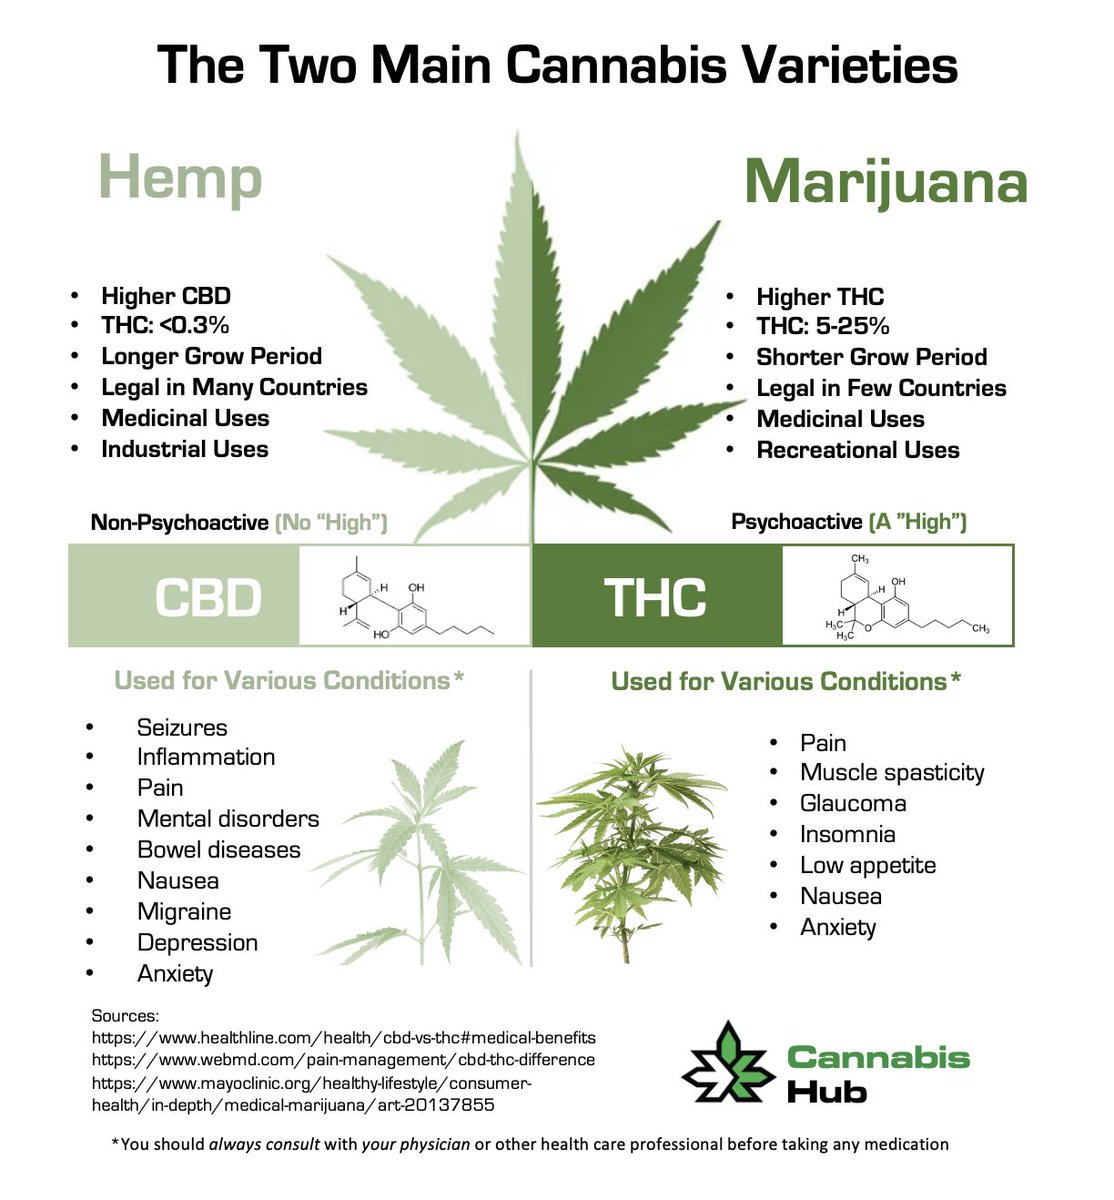 Some of the differences between the two main varieties 

#cannabis #stonerfam #legalizeIt #weedmob #cbd